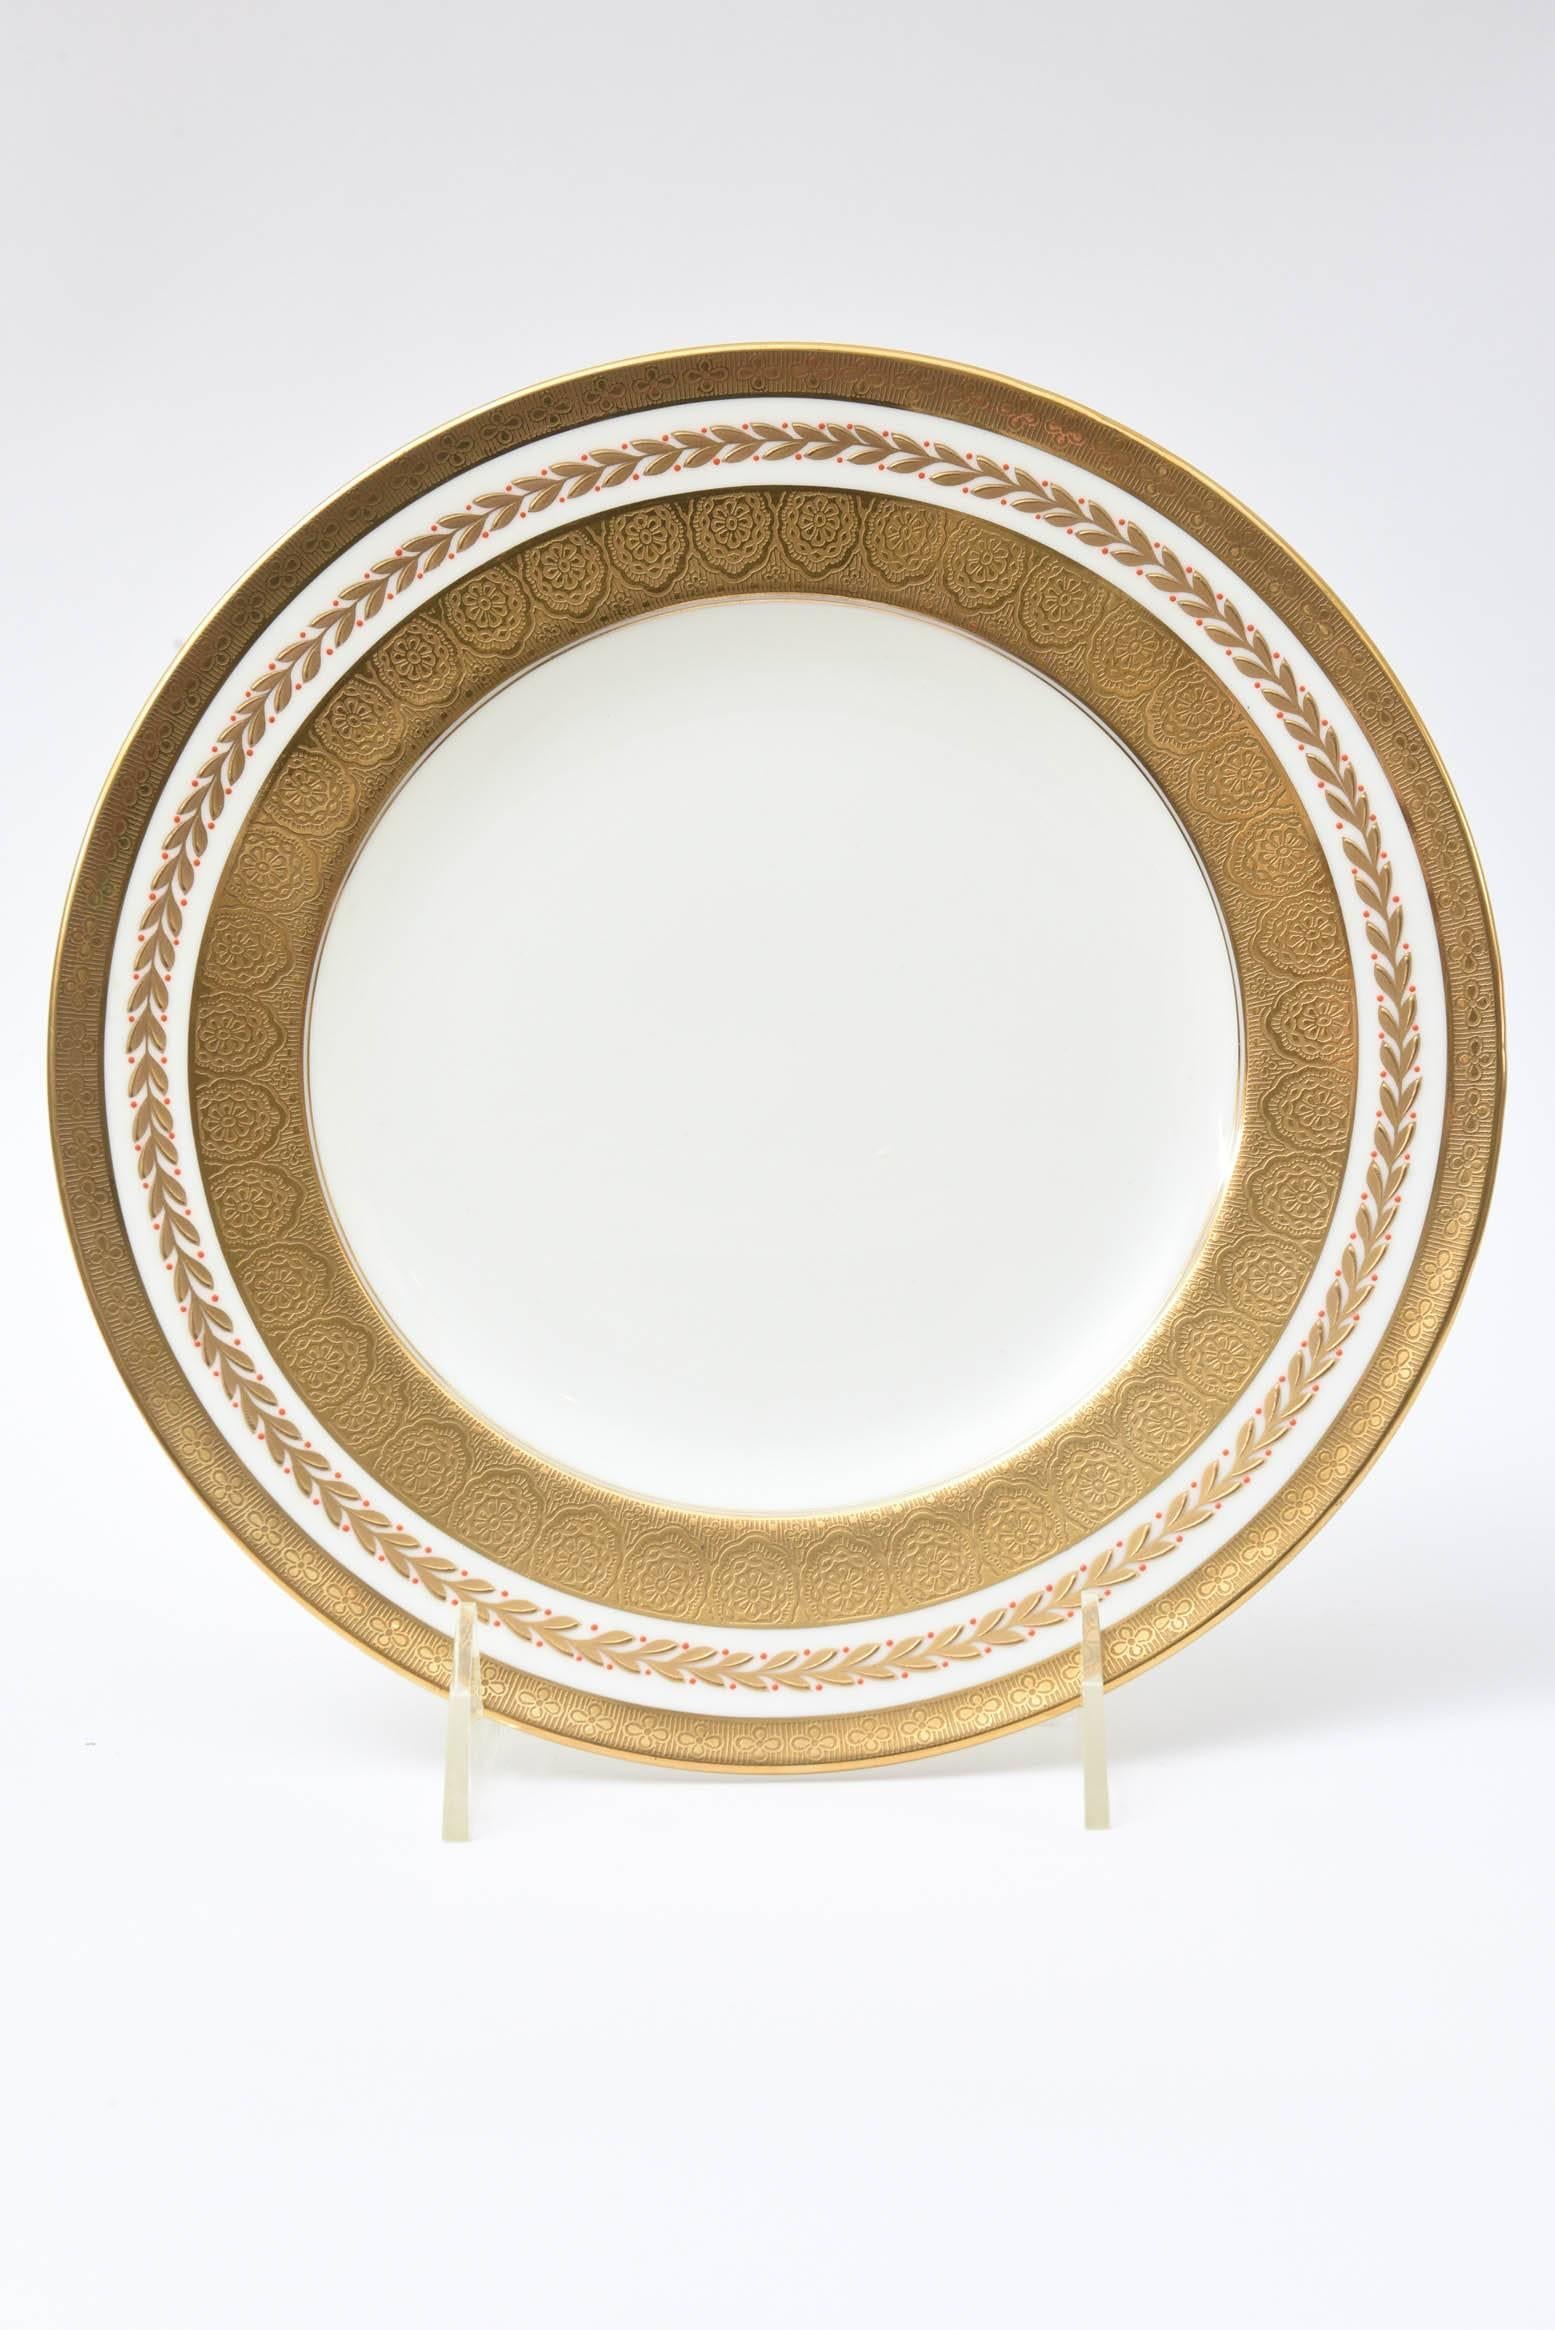 Hand-Crafted 12 Tiifany Dinner Plates with Classic Raised Gilt Laurel Leaf Design, Gilt Bands